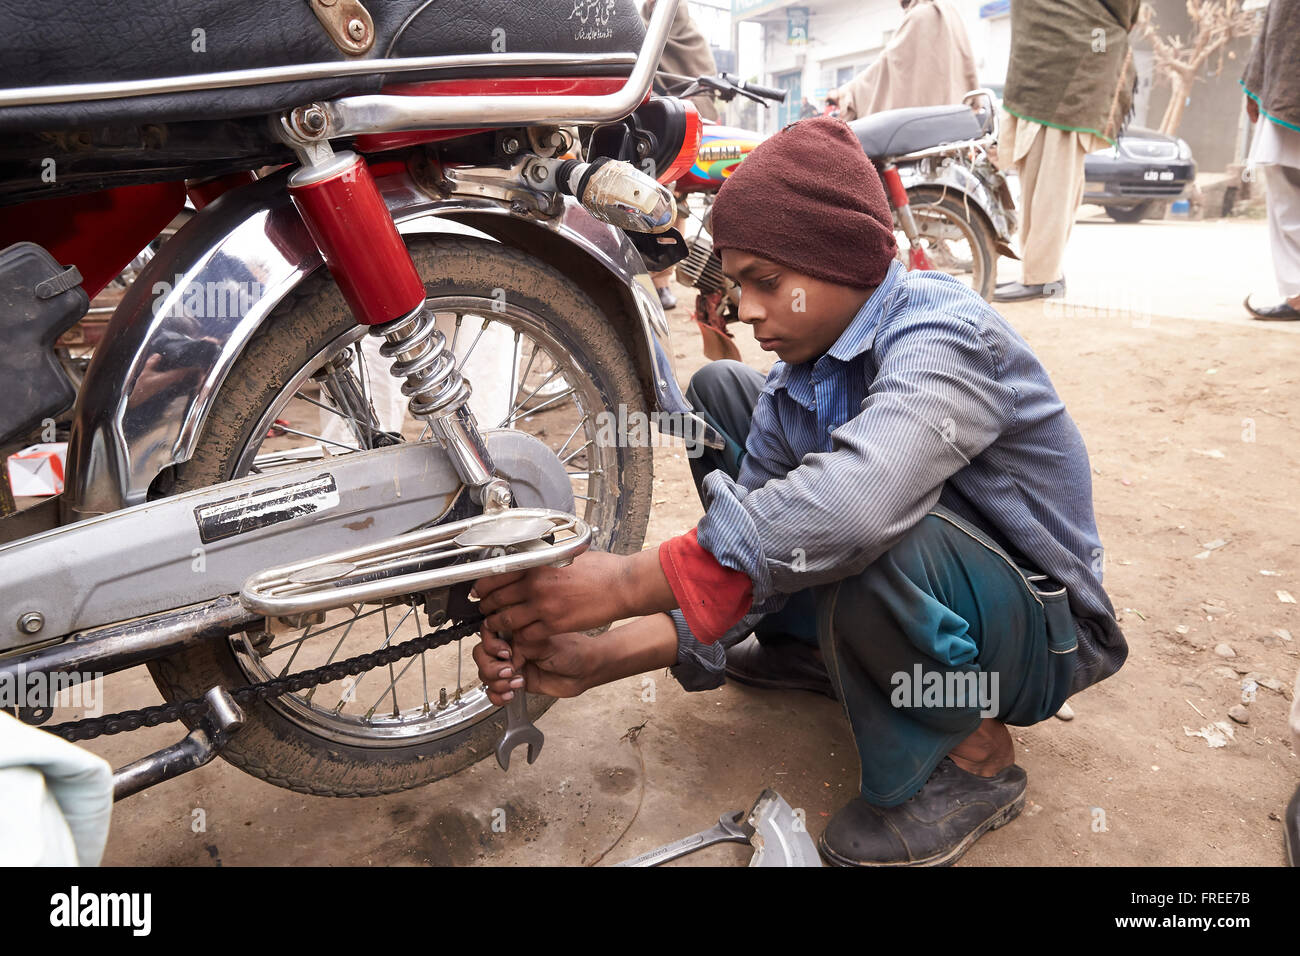 Young guy is repairing a motorcycle, motorcycle workshop, Kujerad, Pakistan Stock Photo